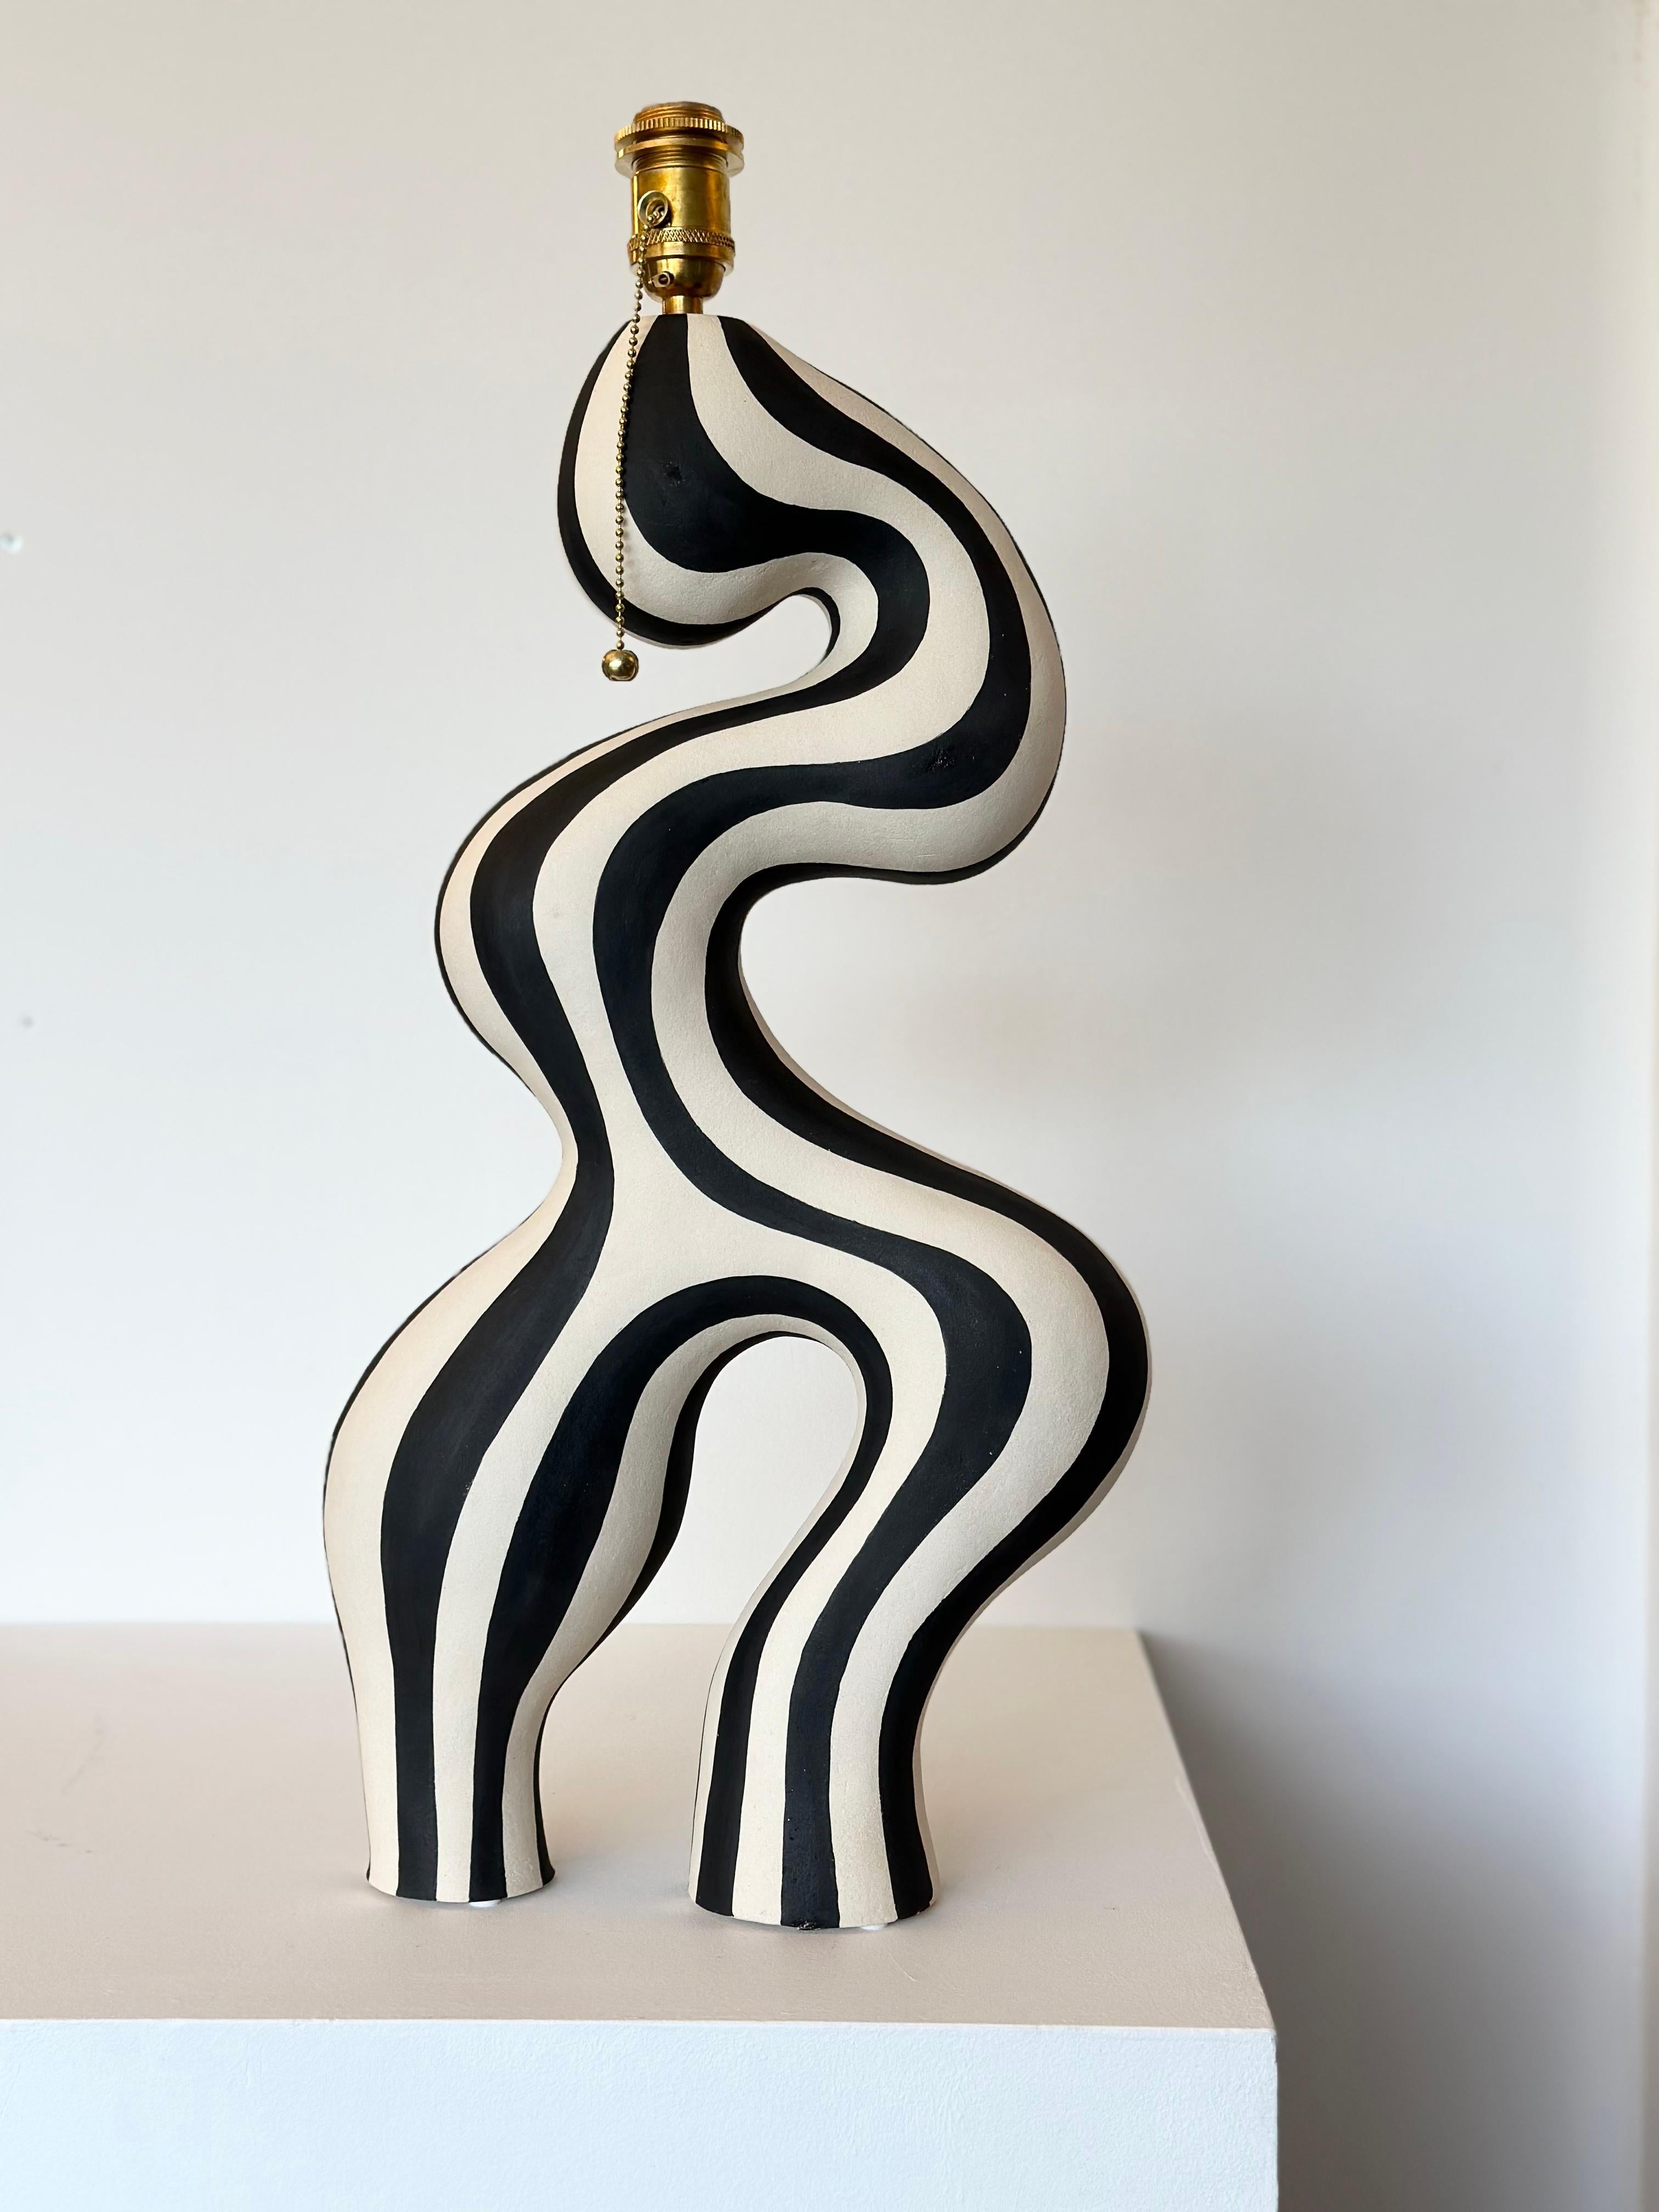 A statement piece designed and handcrafted by ceramic artist Johanne Birkeland who works under the artist name Jossolini. The lamp base is hand built in white stoneware clay, and hand decorated with black matte glaze. 

The Norwegian artist works